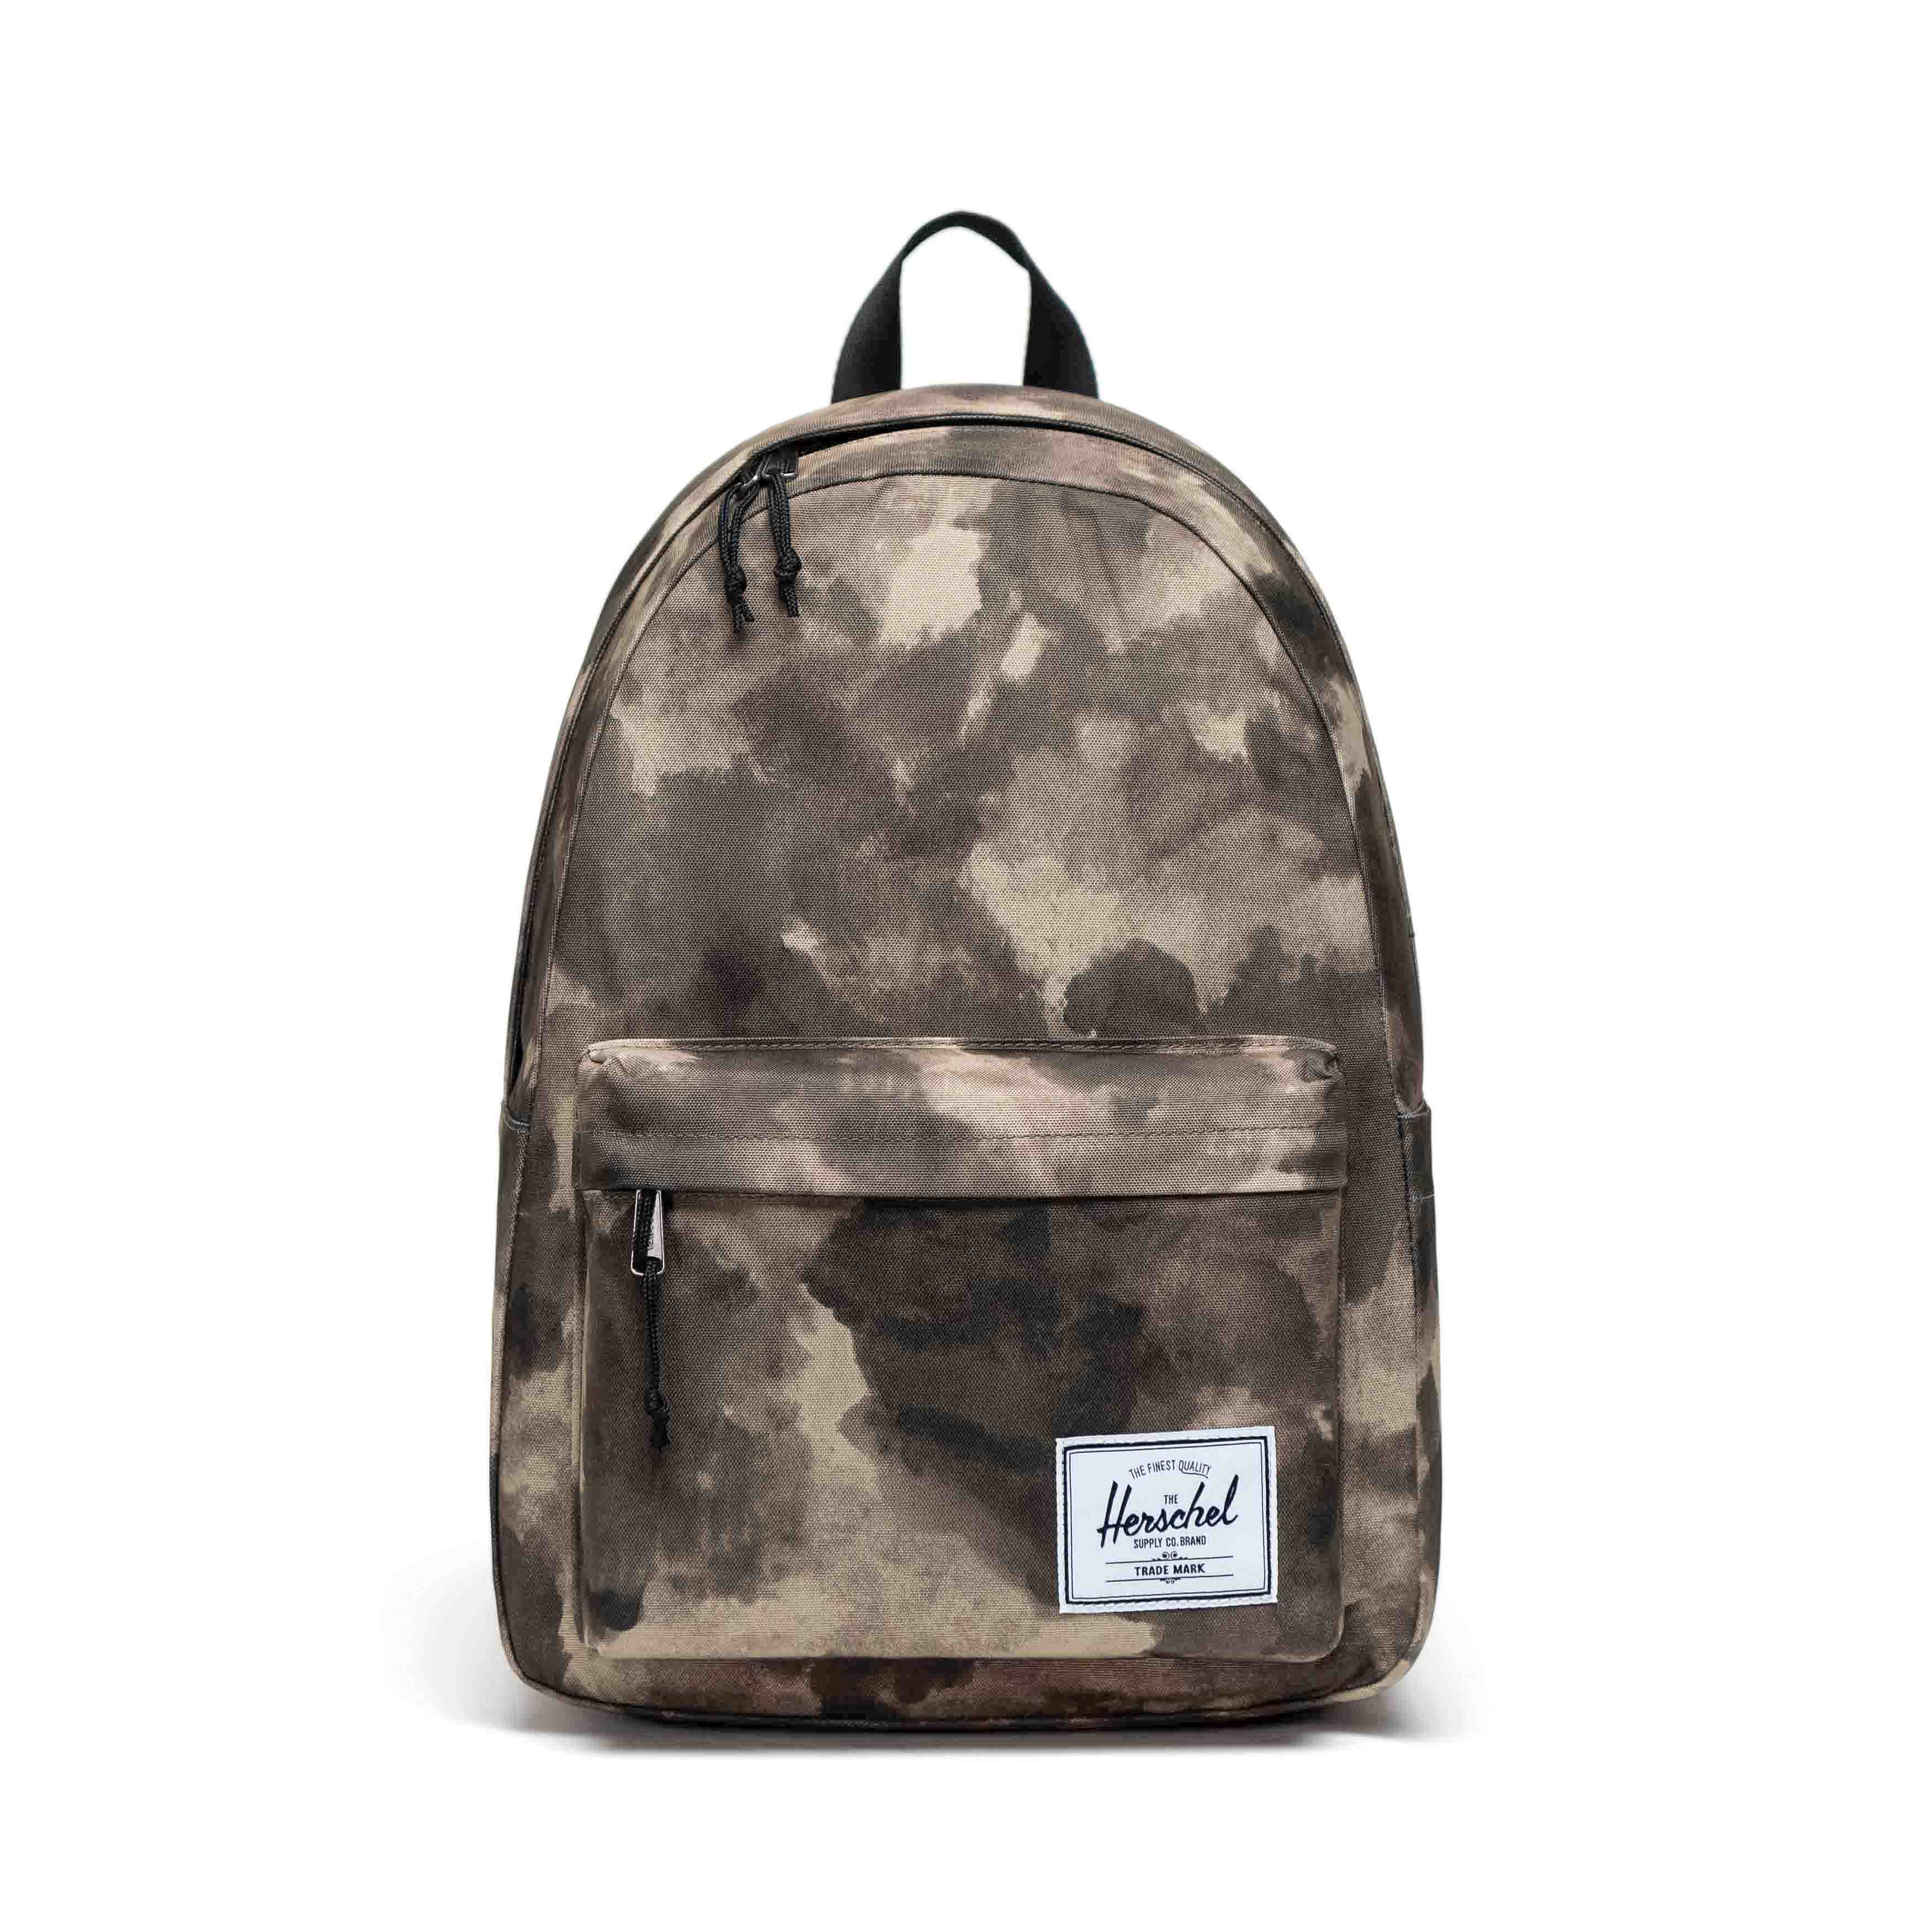 Herschel Supply Co. USA  Backpacks, Totes & Accessories